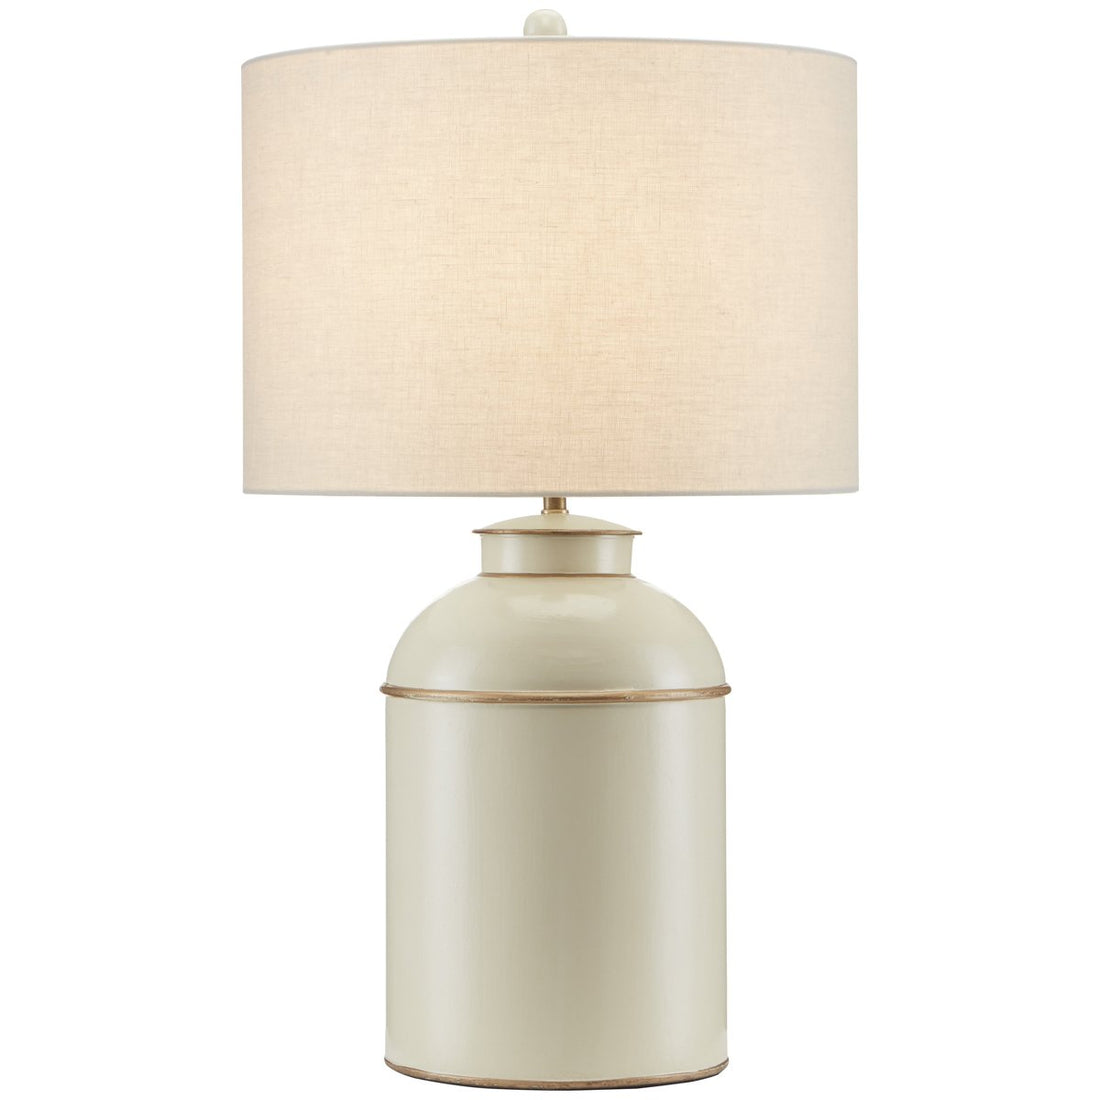 Currey and Company London Table Lamp